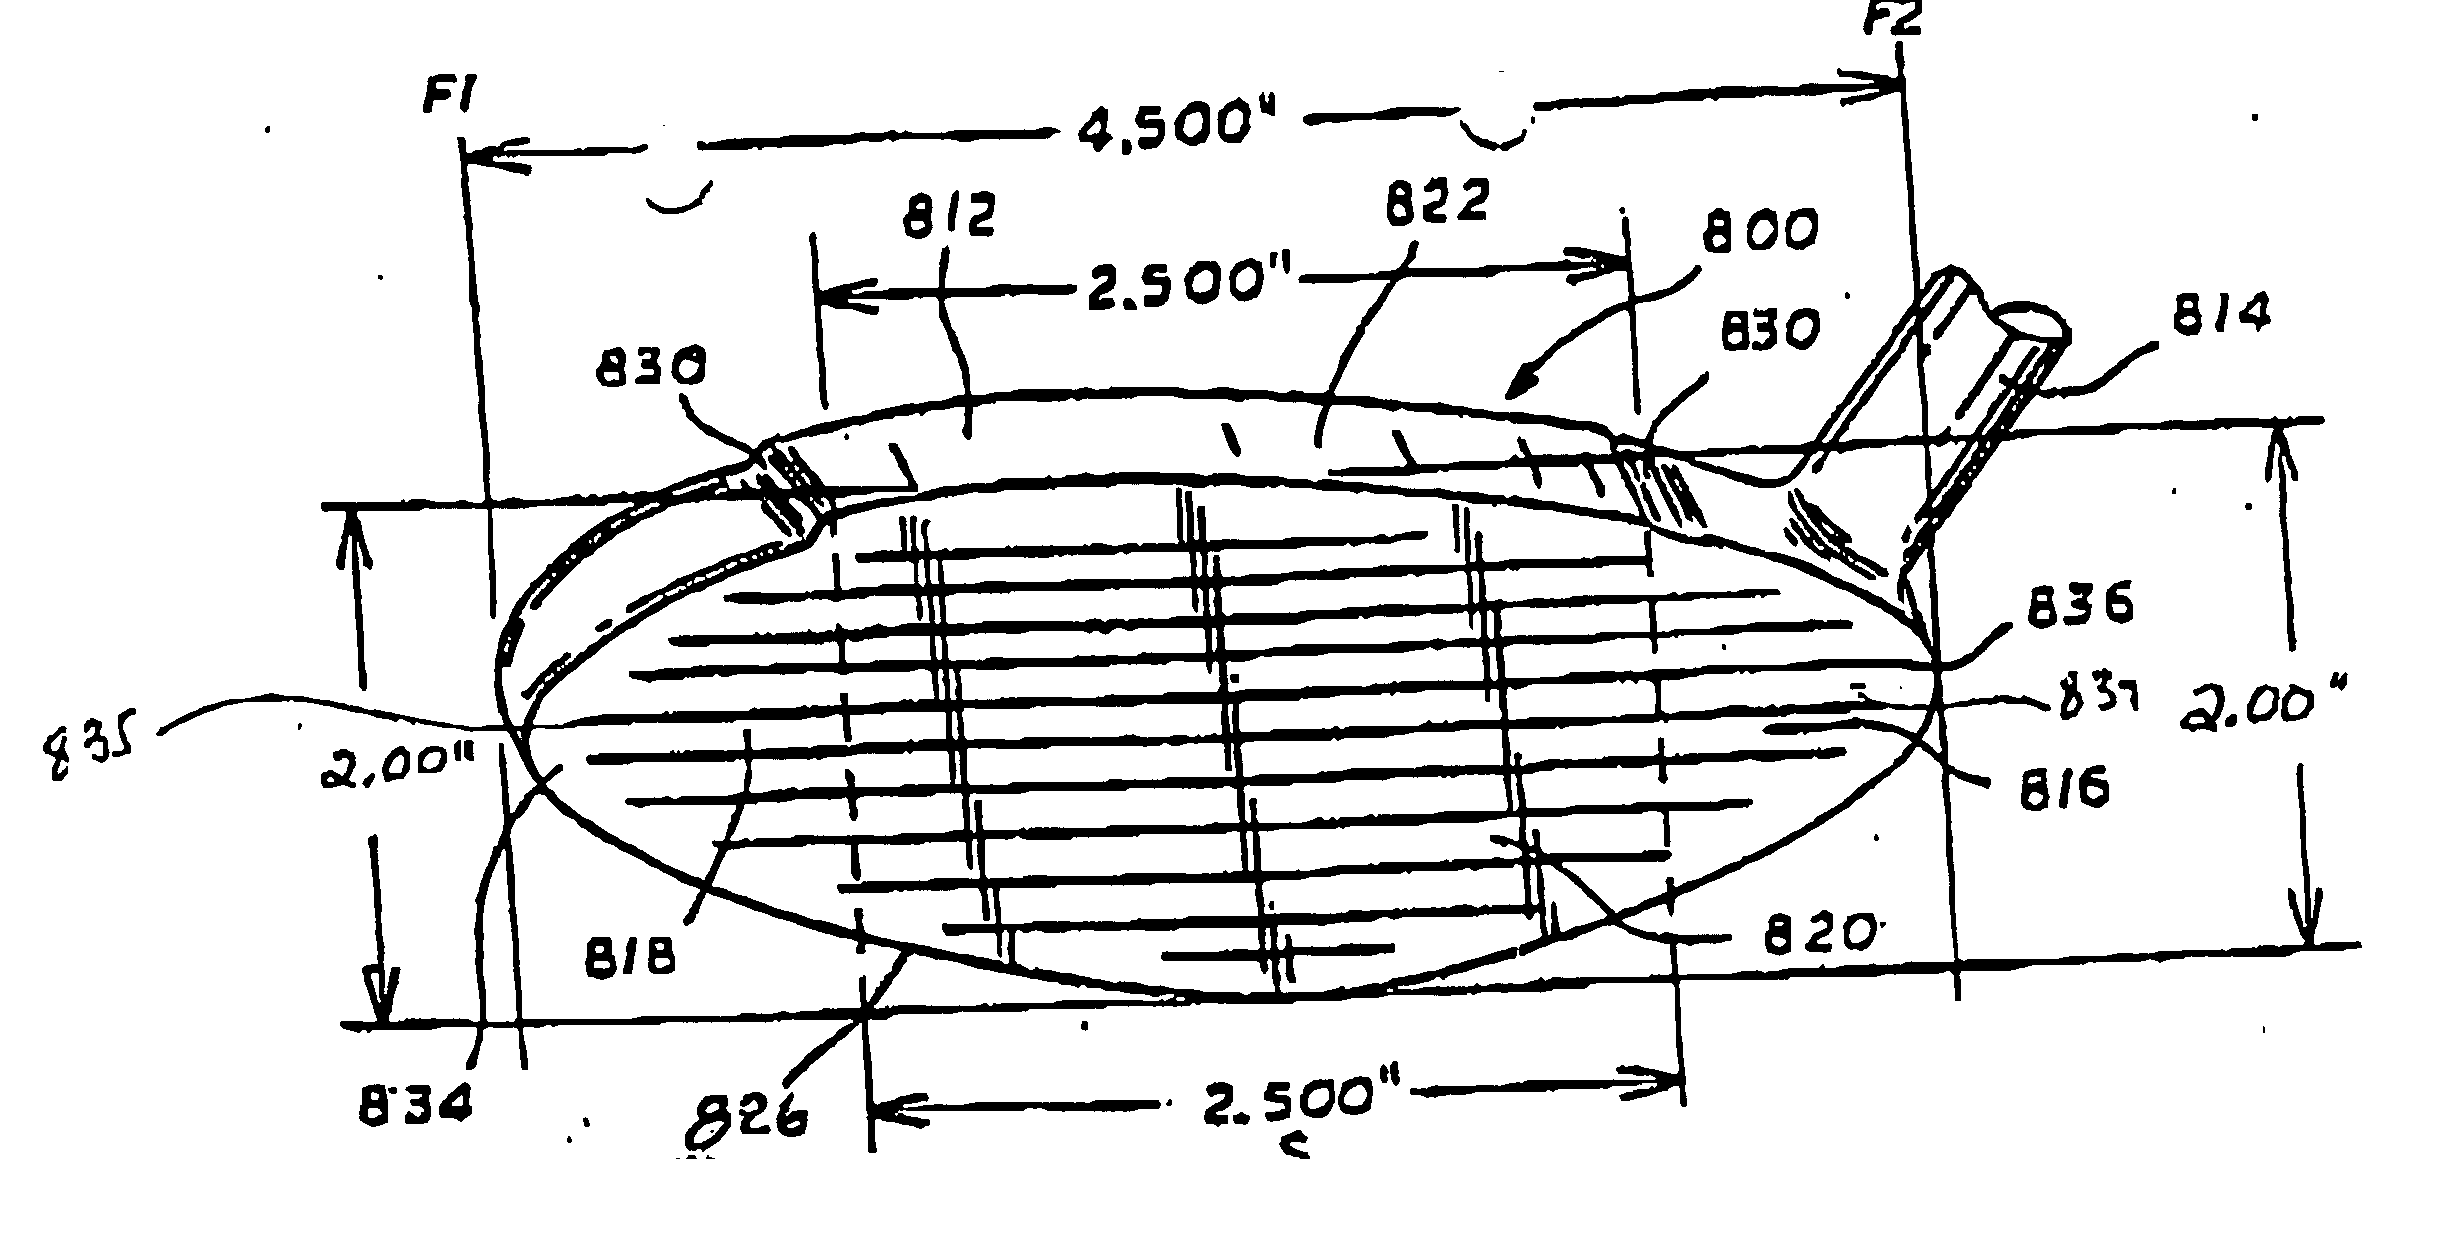 Metalwood type golf clubhead having an improved structural system for reduction of the cubic centimeter displacement and the elimination of adverse aerodynamic drag effect